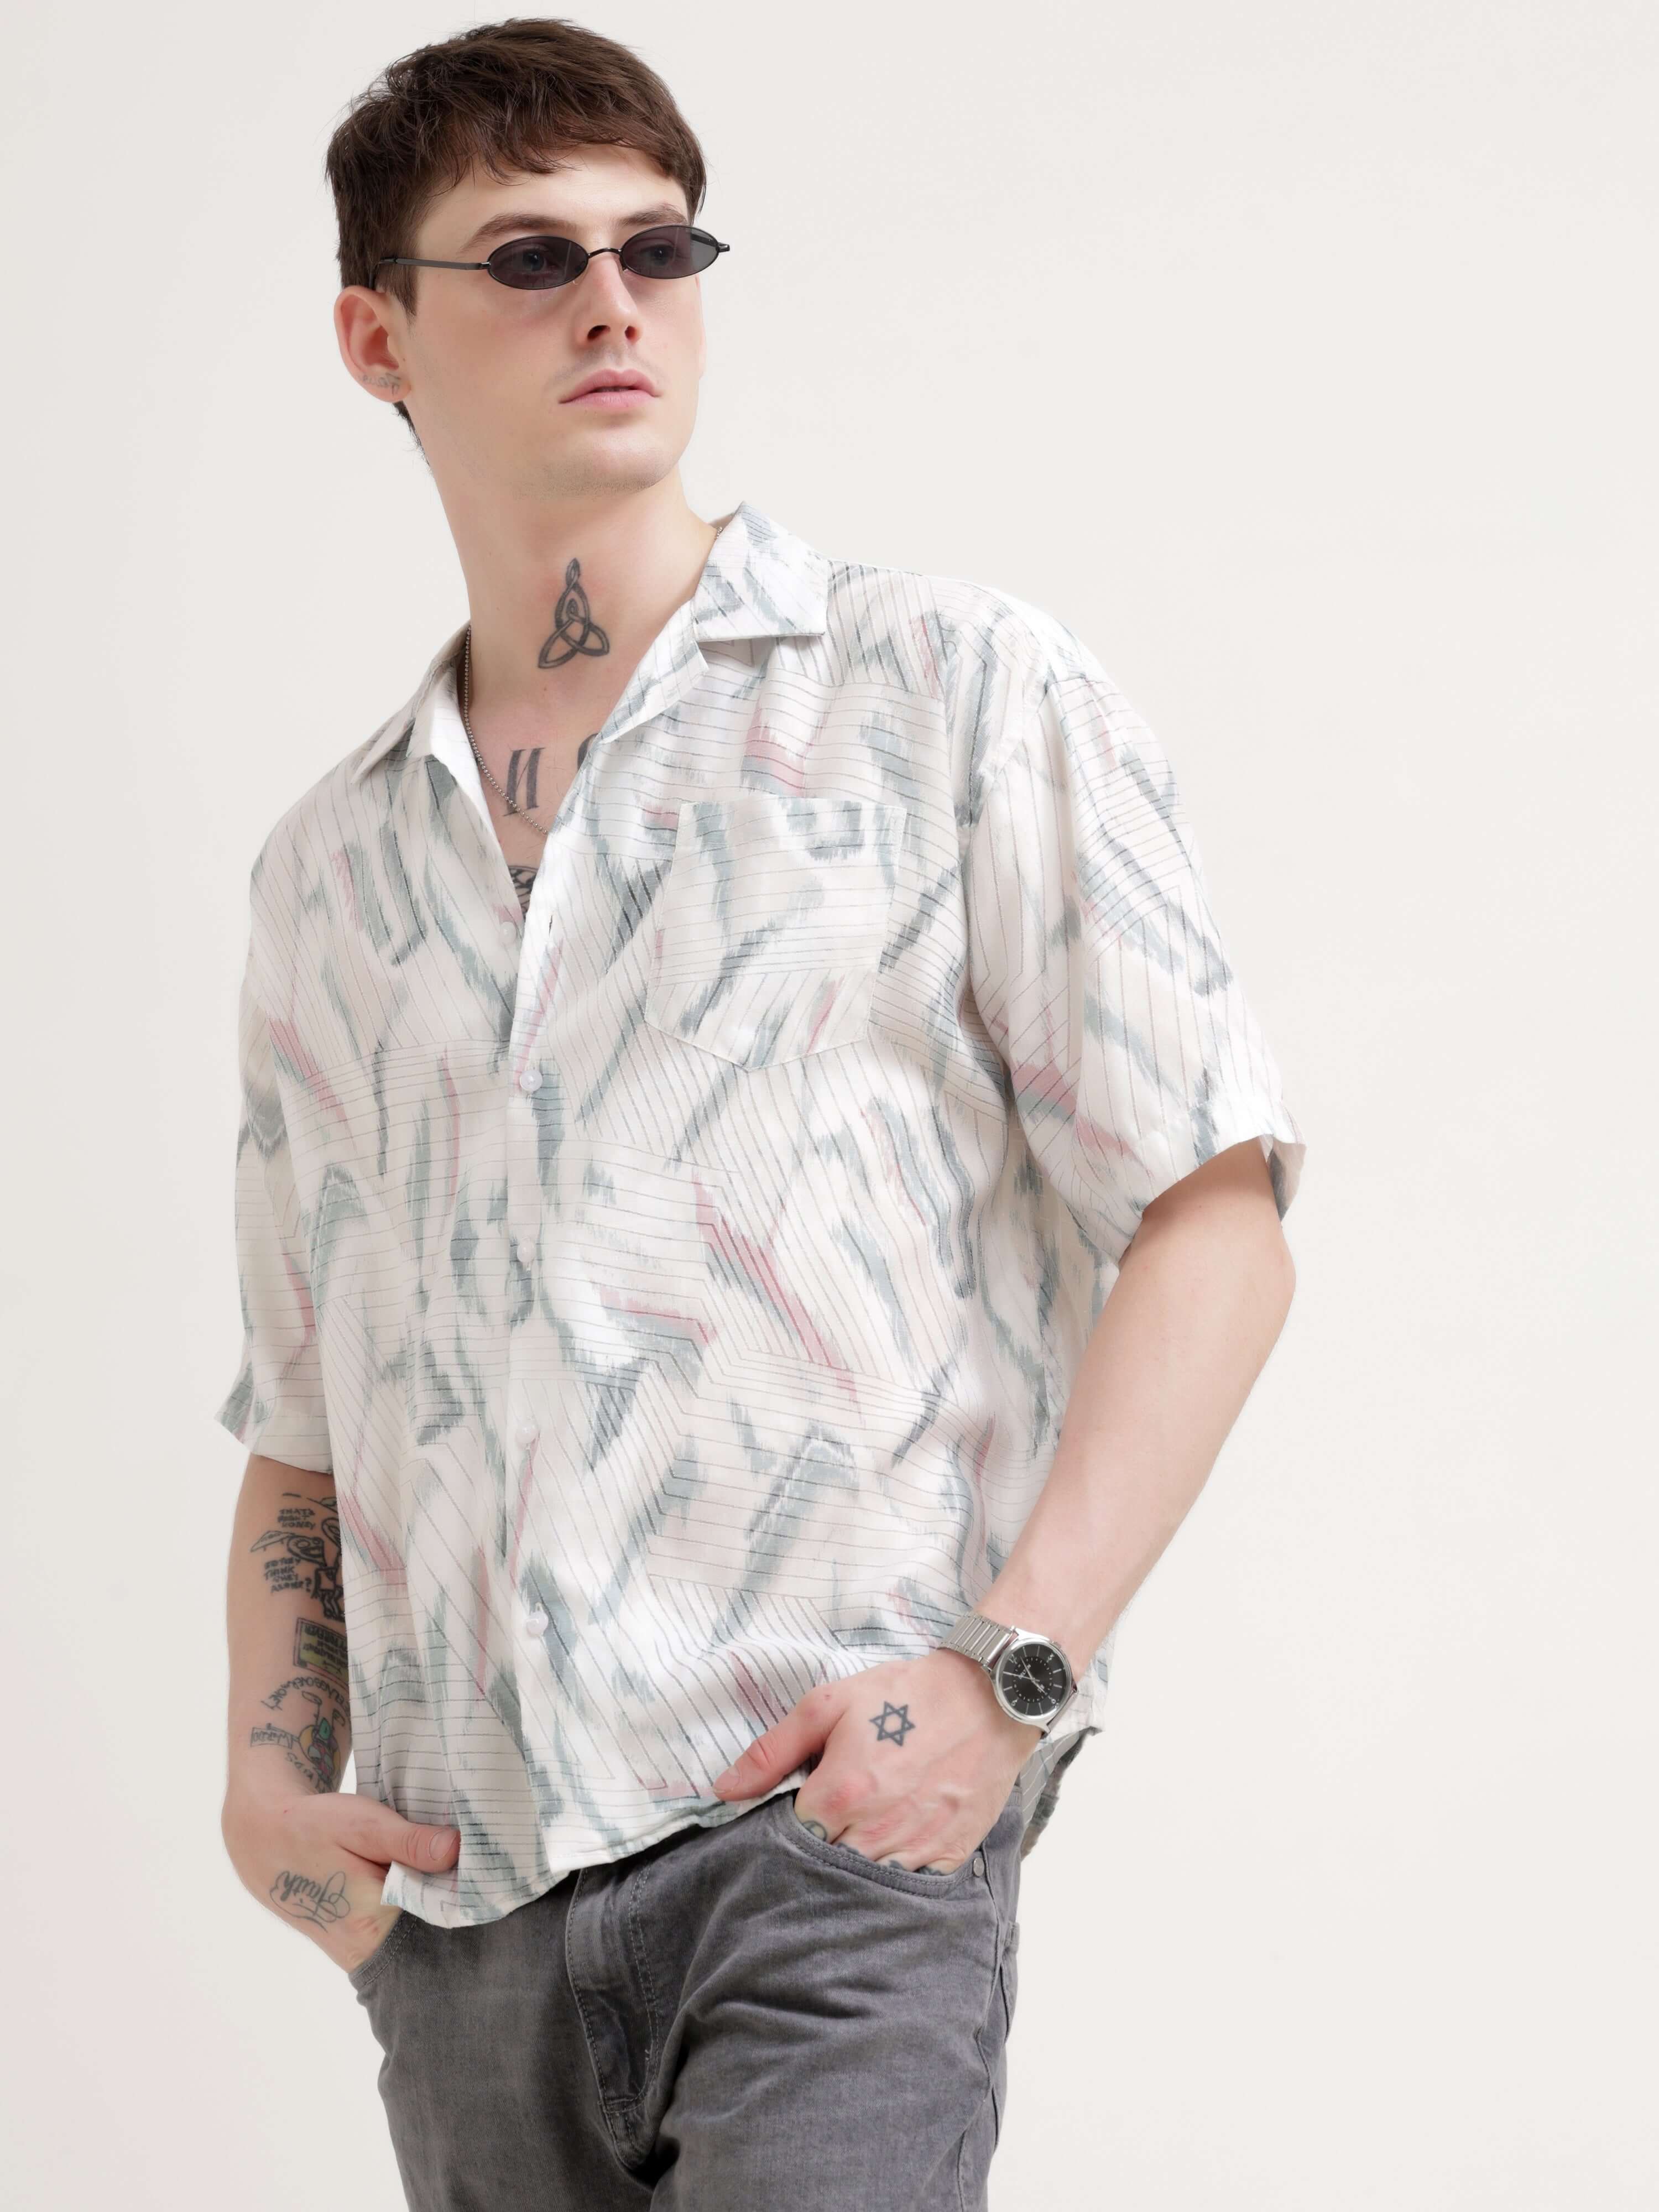 Unique vision blue crochet oversized shirt - Men's Casual Wear shop online at Estilocus. Slip into summer with our blue crochet oversized shirt. Ideal for Hawaiian vibes, comfy & stylish with a relaxed fit. Grab yours now!